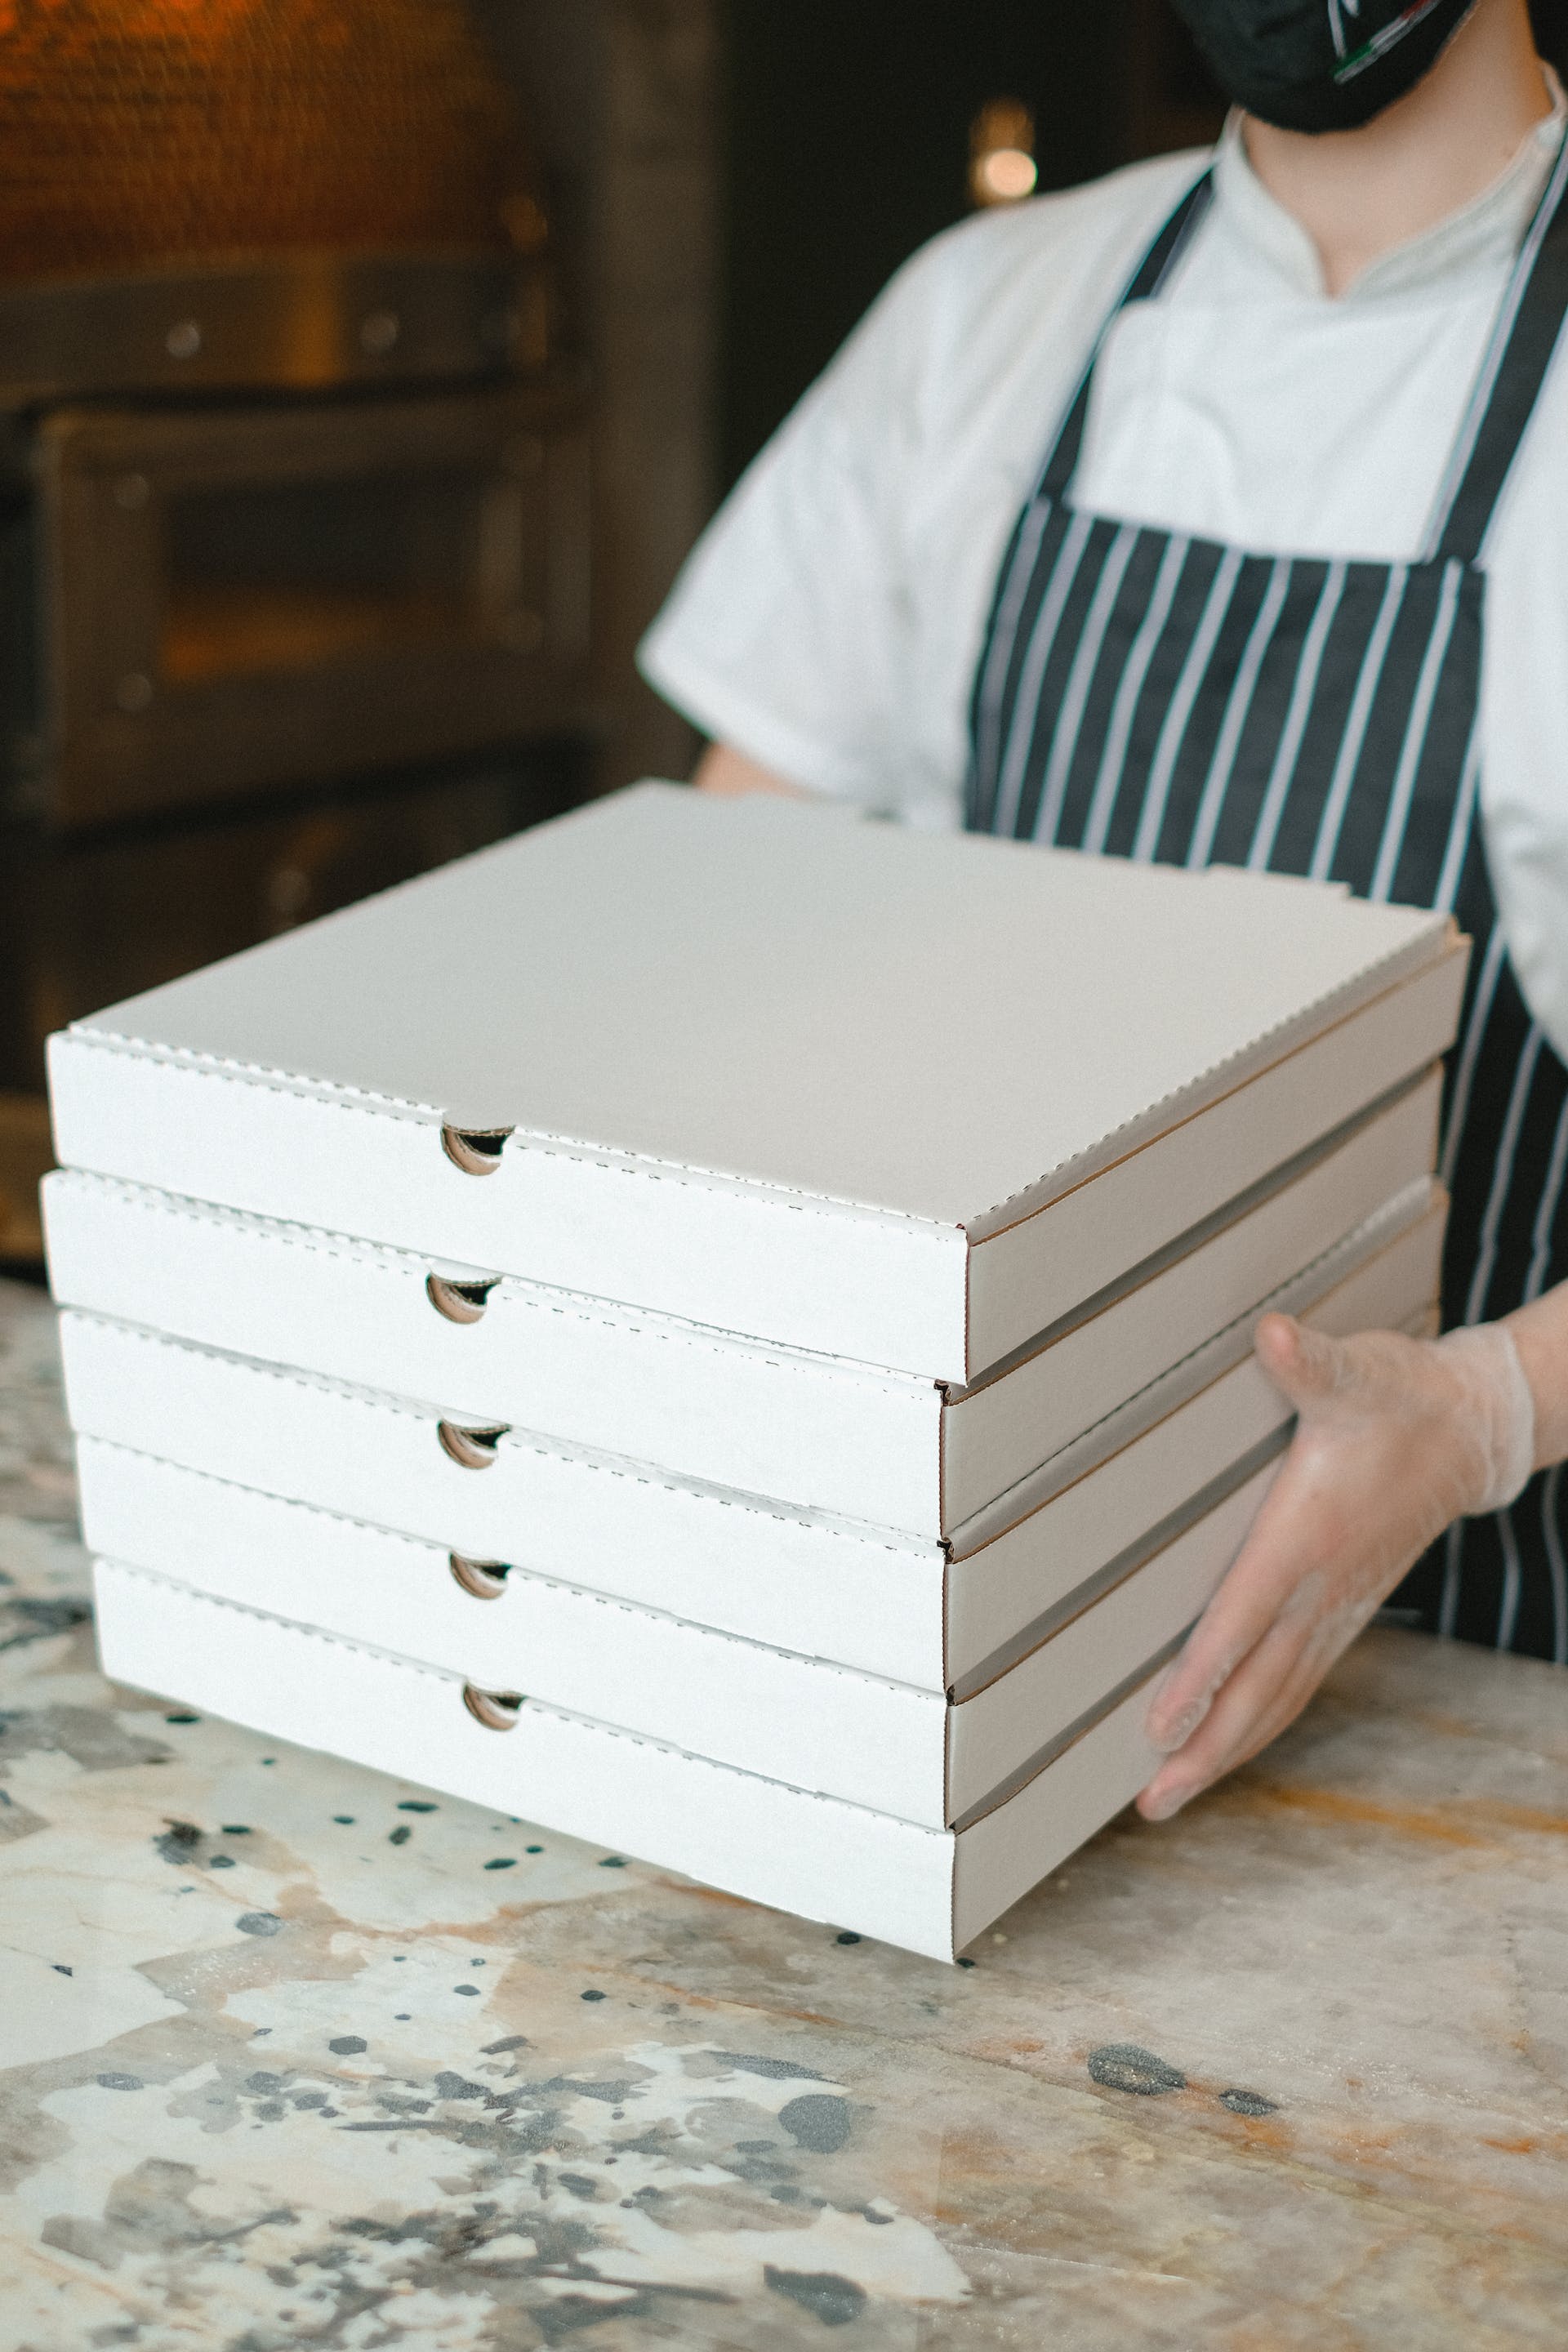 A person holding pizza boxes | Source: Pexels